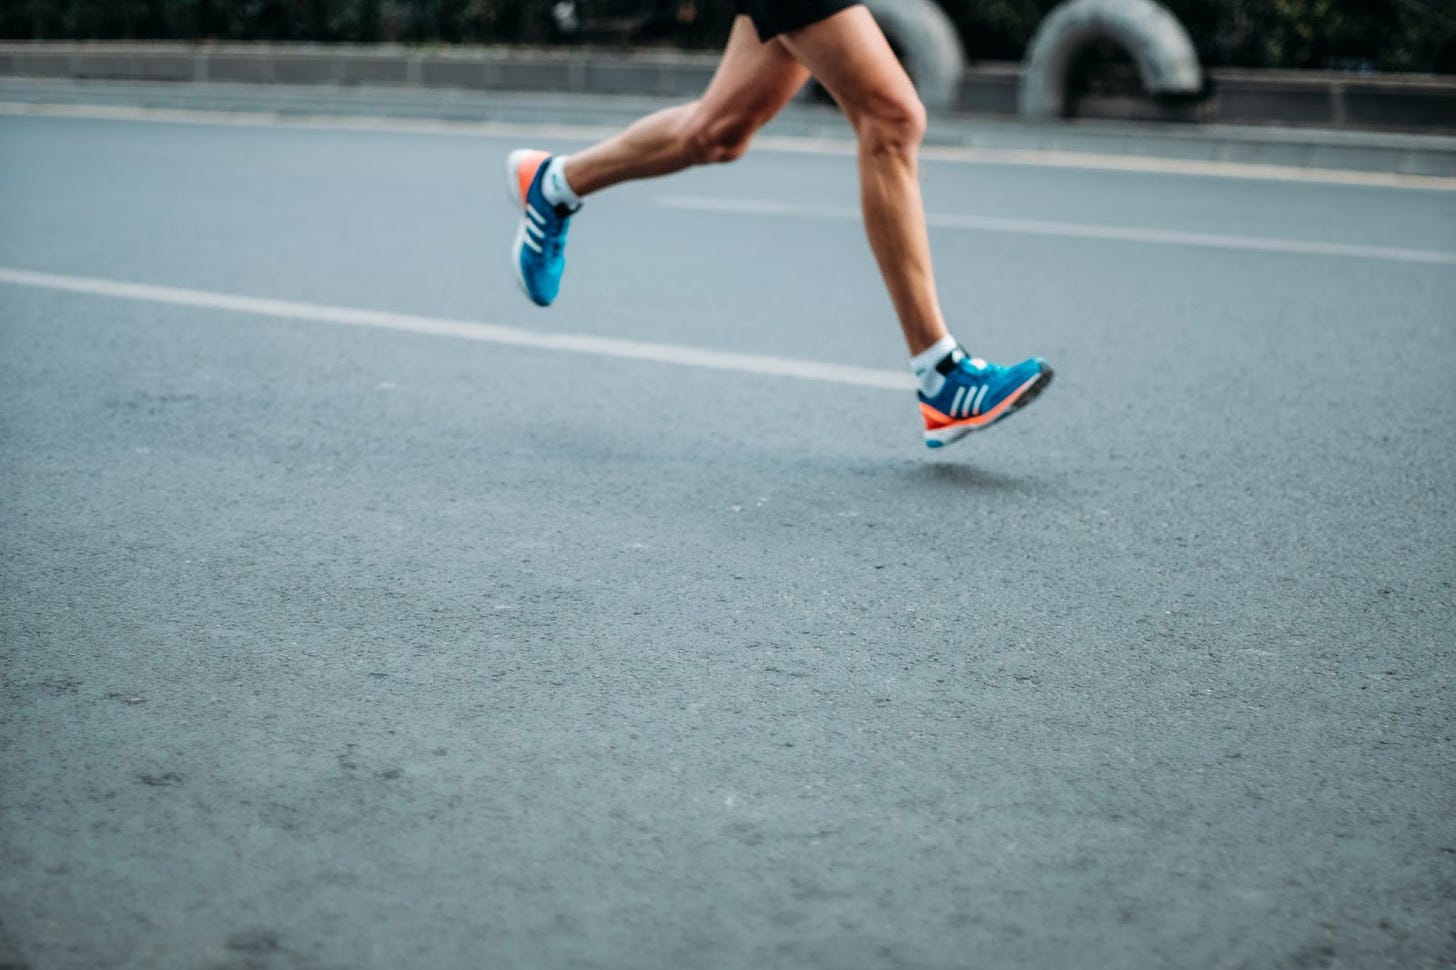 A man in running shoes speeds across the tack.